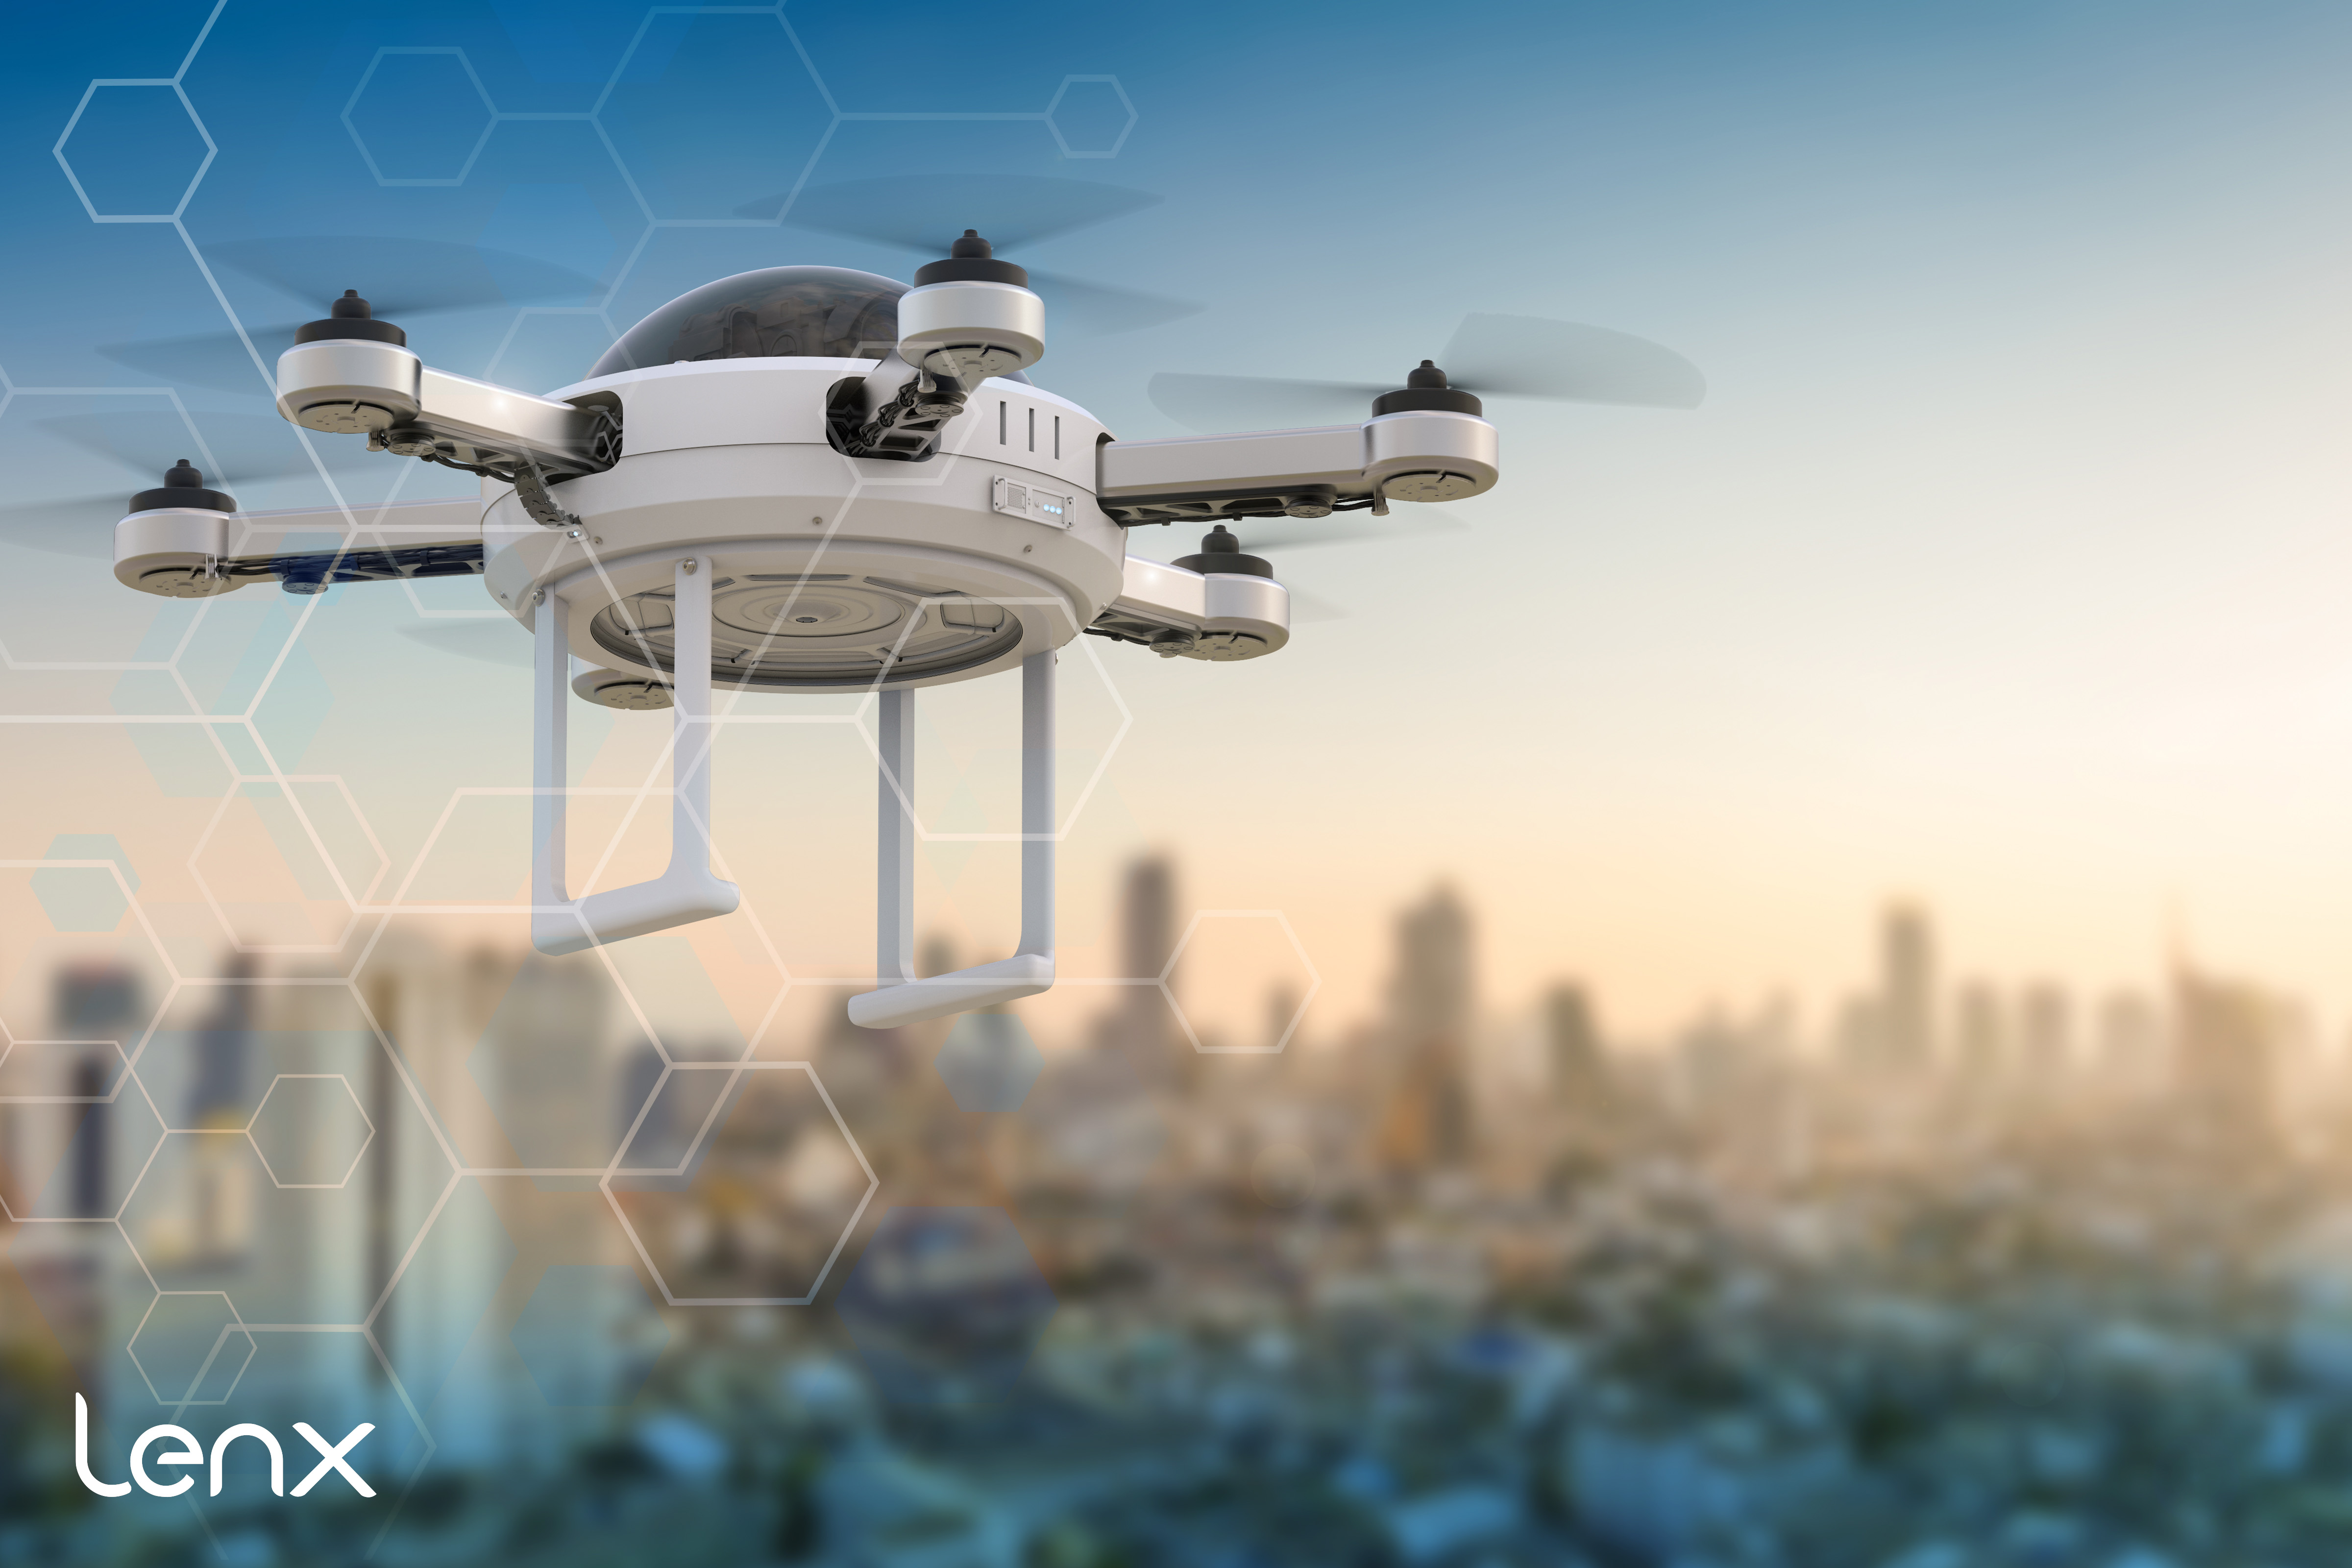 Advantages of Combining AI Security and Active Shooter Detection with Drones